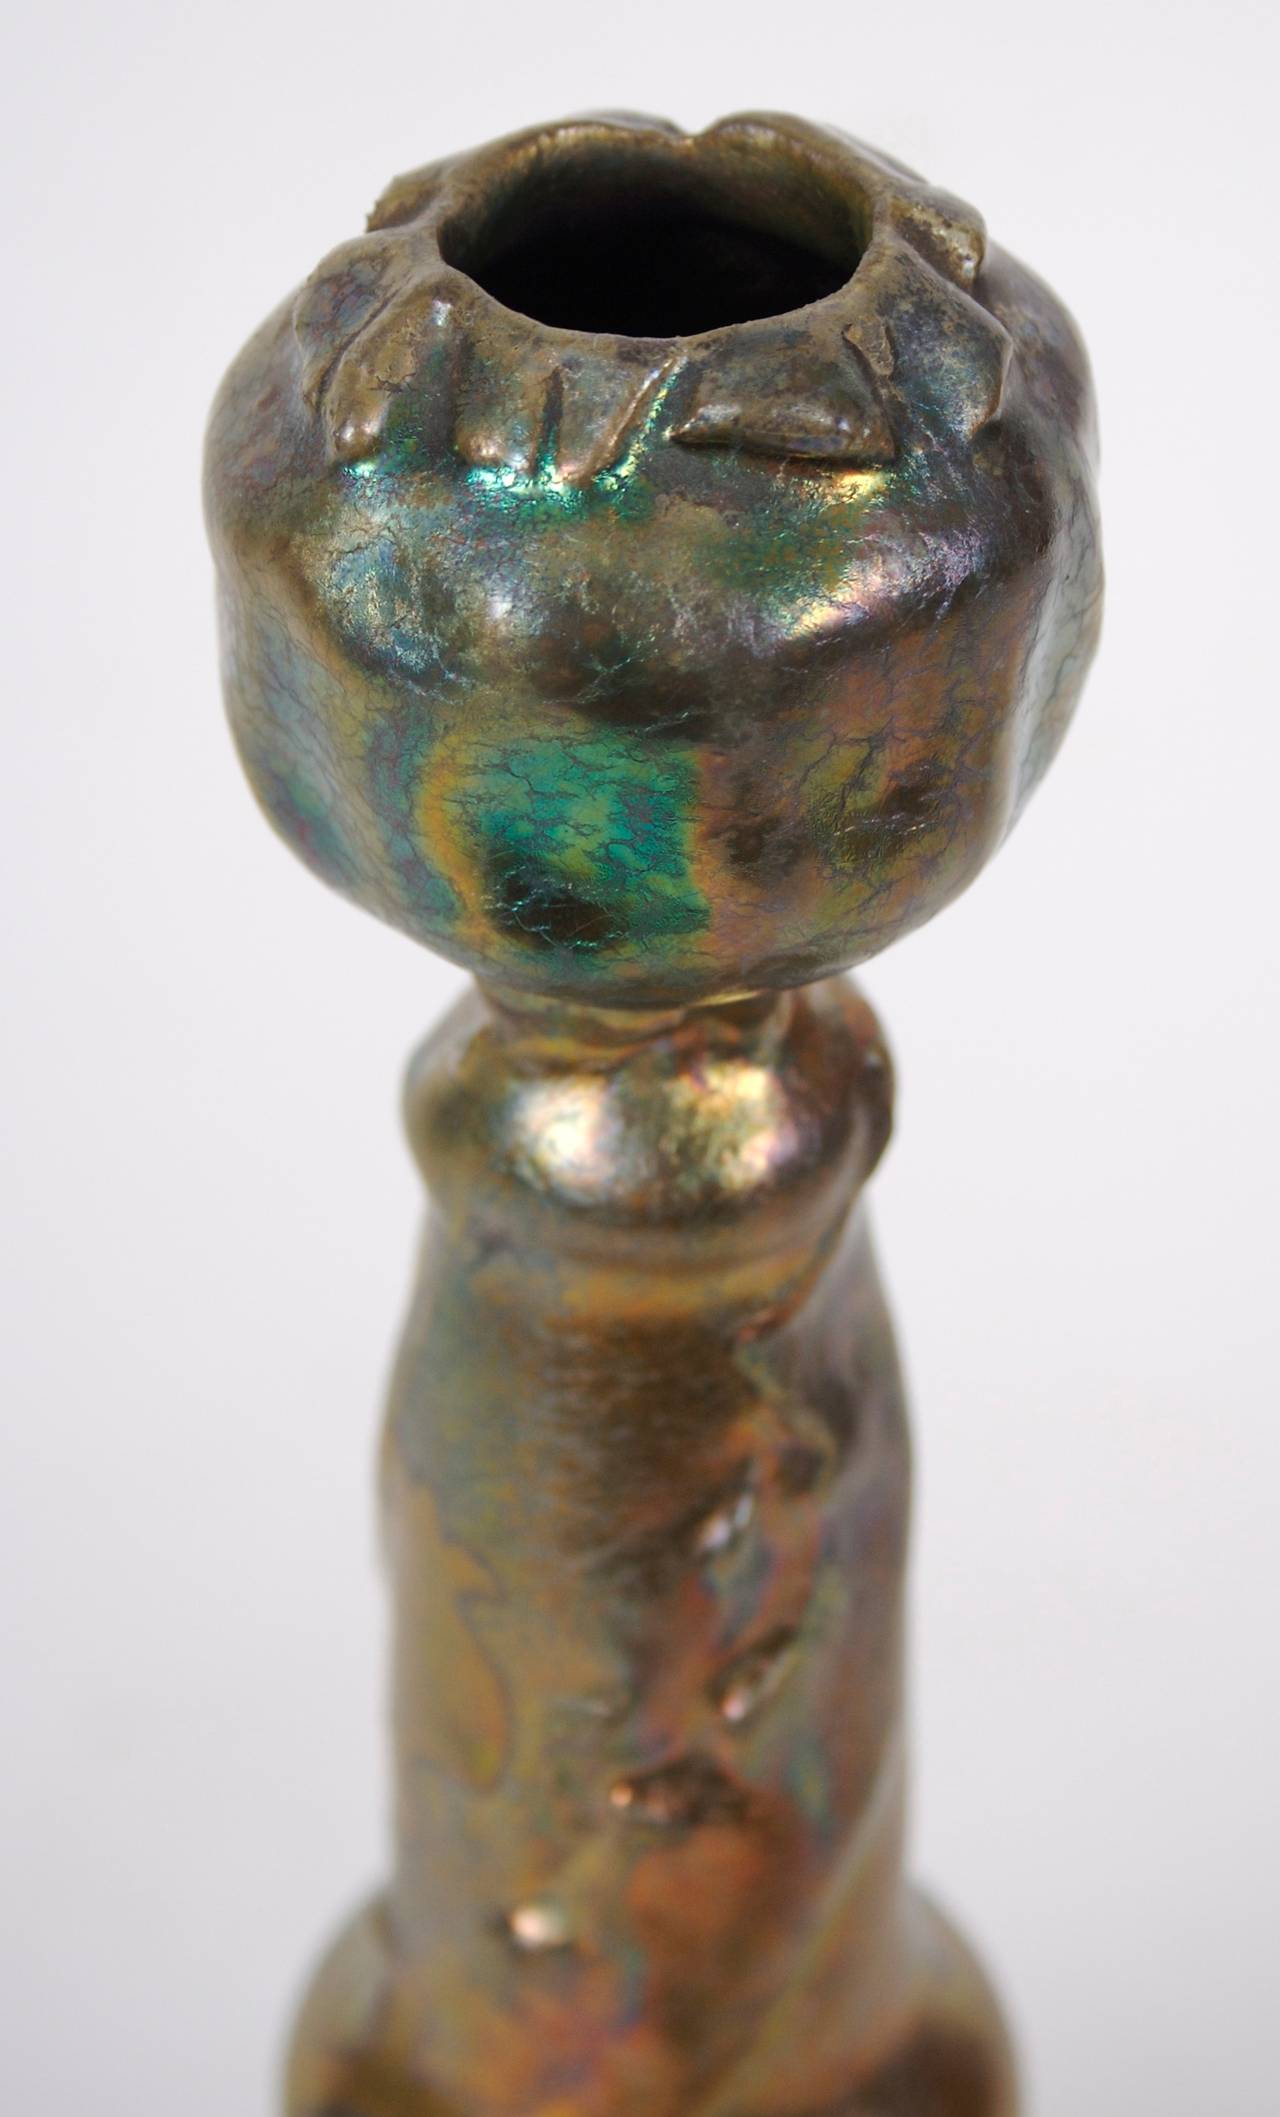 Wonderful color and iridescence in this French Art Nouveau period ceramic vase by Frederic Danton, c. 1905. 

Danton (1874-1932) was born in Aubusson France, where he was employed at the Aubusson factory as a textile designer. He founded a small